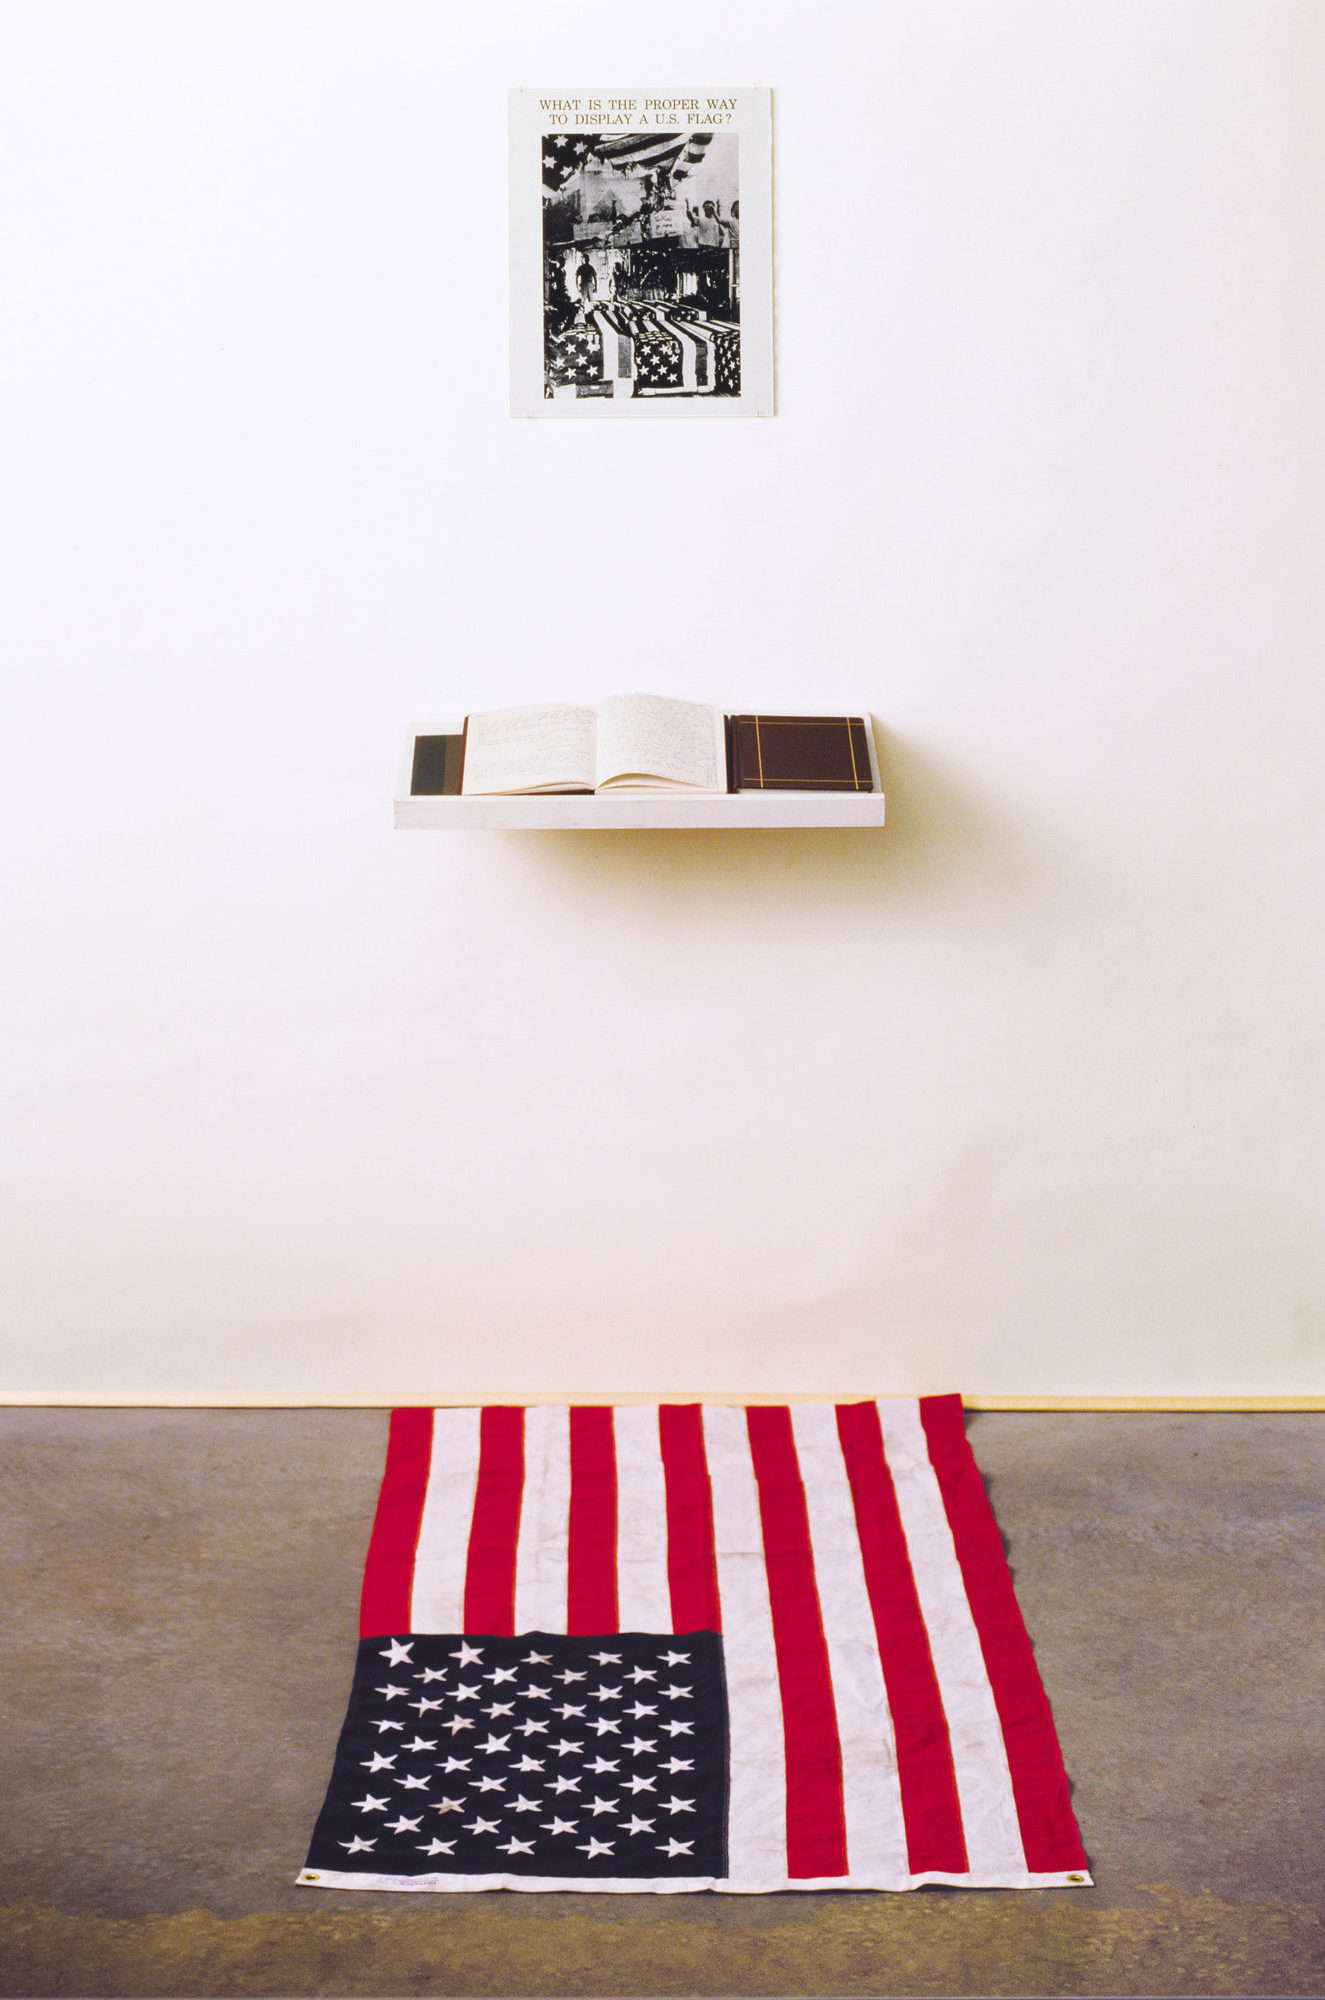 American flag on floor below open book and poster on wall.